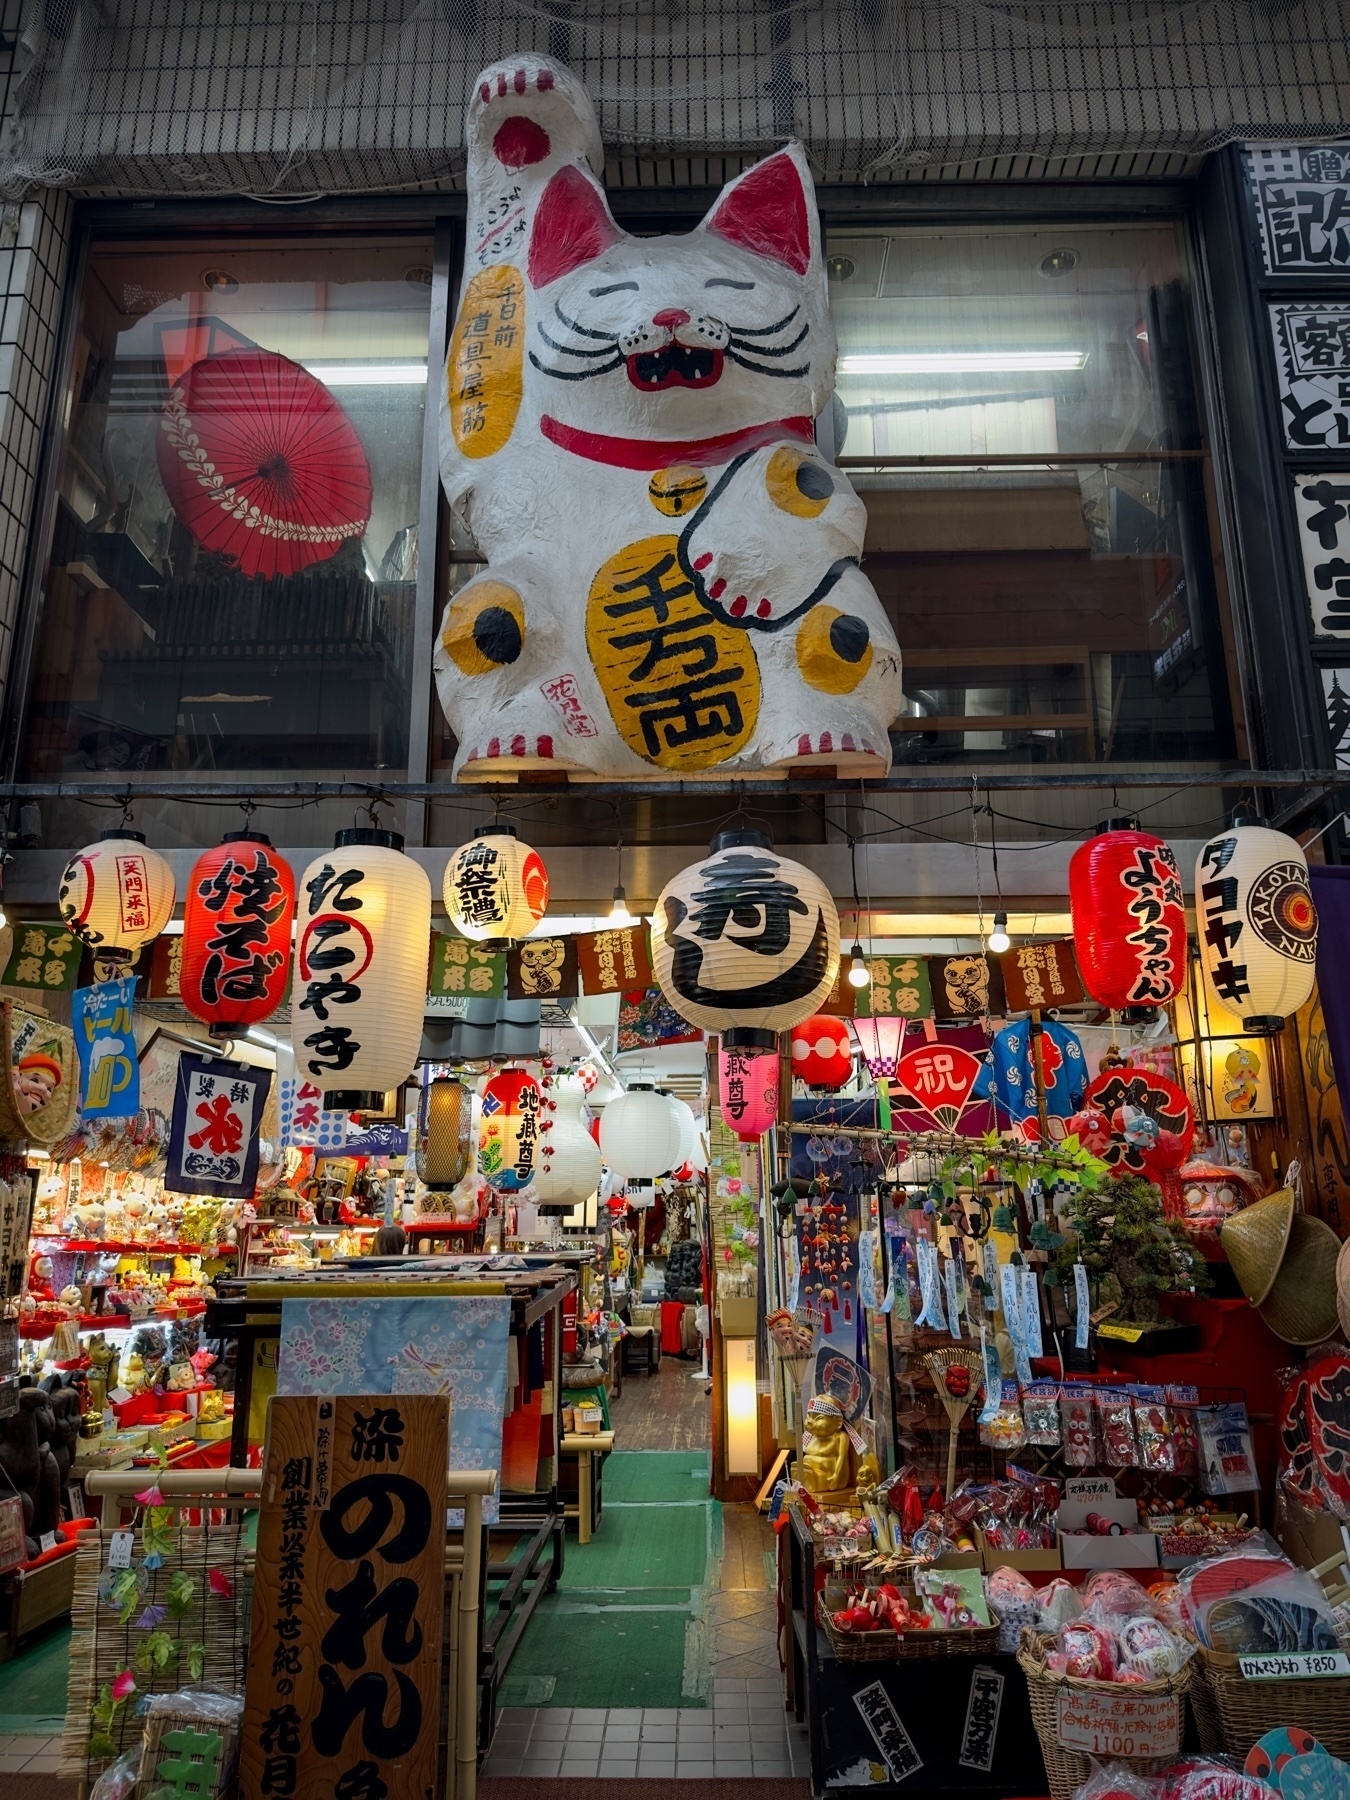 This image shows a Japanese market alley with traditional goods and decorations, featuring a large Maneki-neko (lucky cat) statue, colorful lanterns, banners, and various cultural and souvenir items on display.